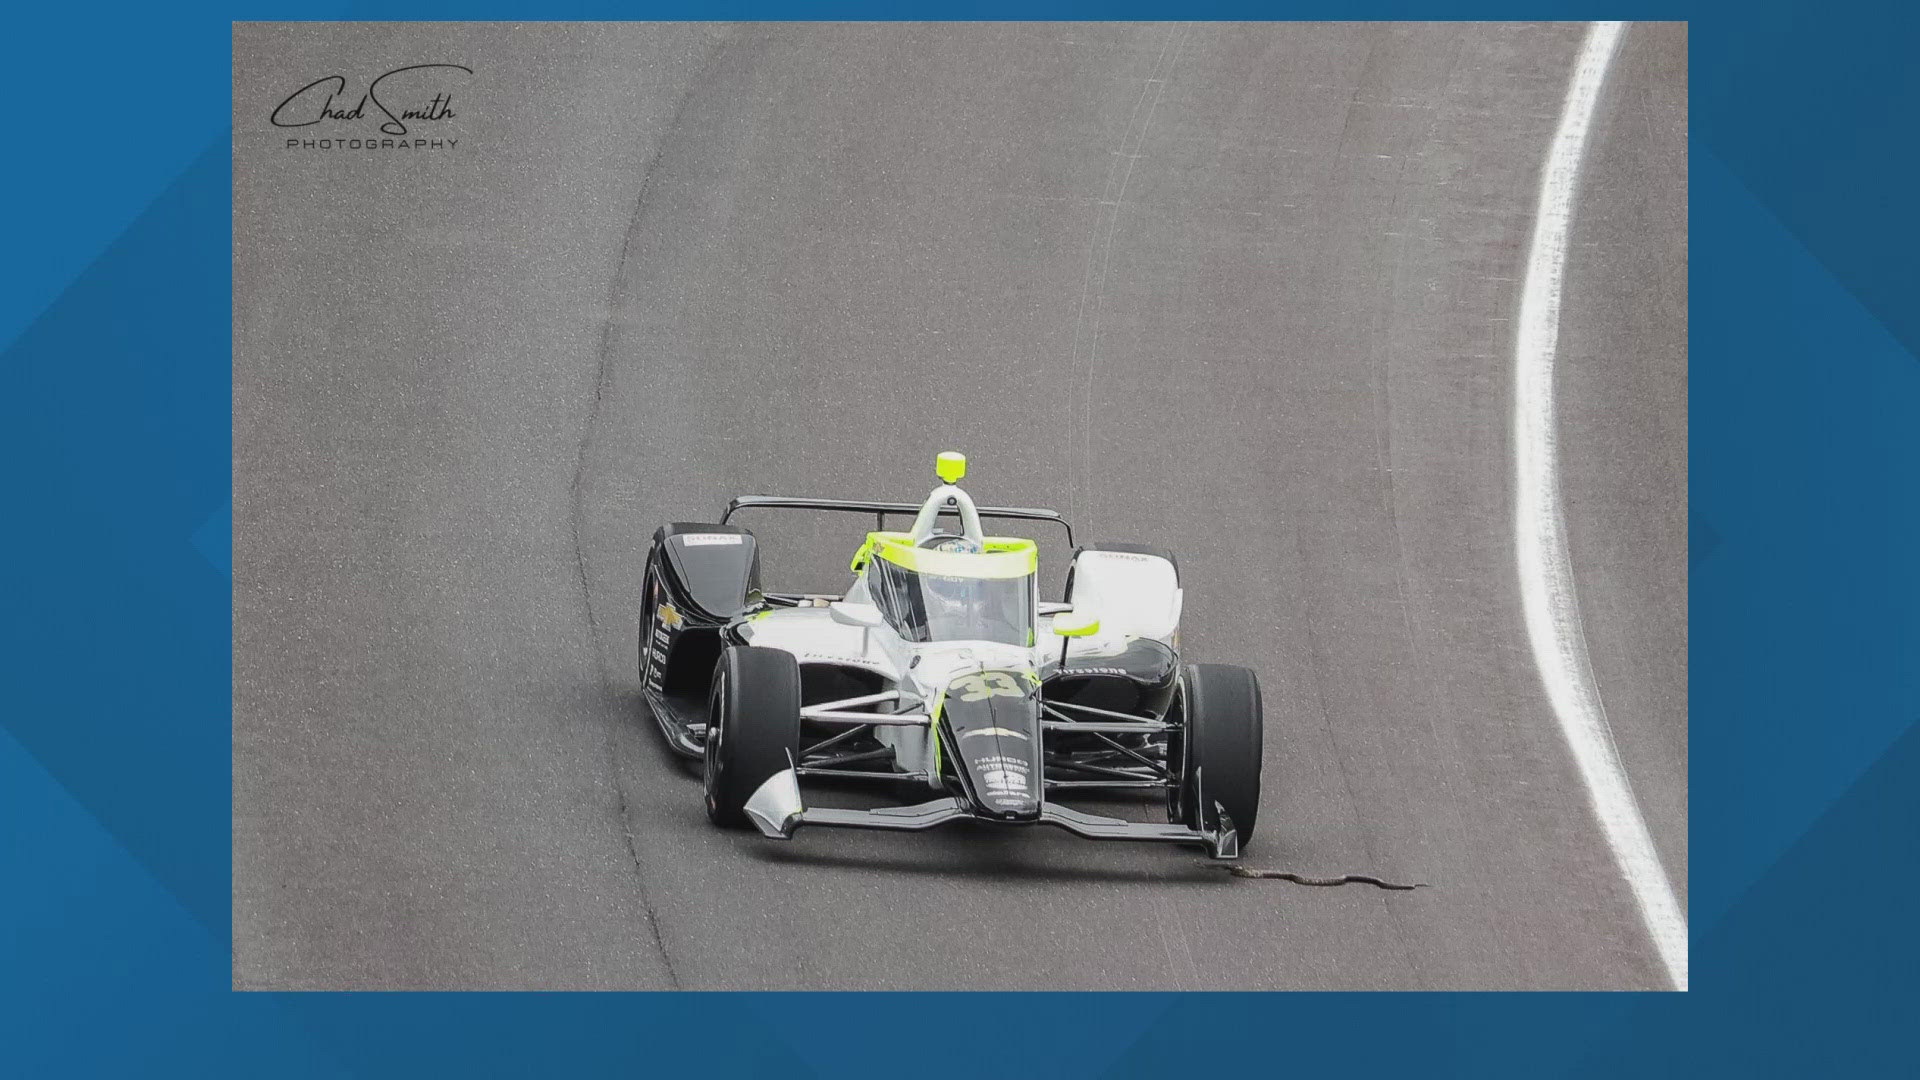 This was in turn one and that is Indycar driver Christian Rasmussen. His front tire about to run right over that reptile.